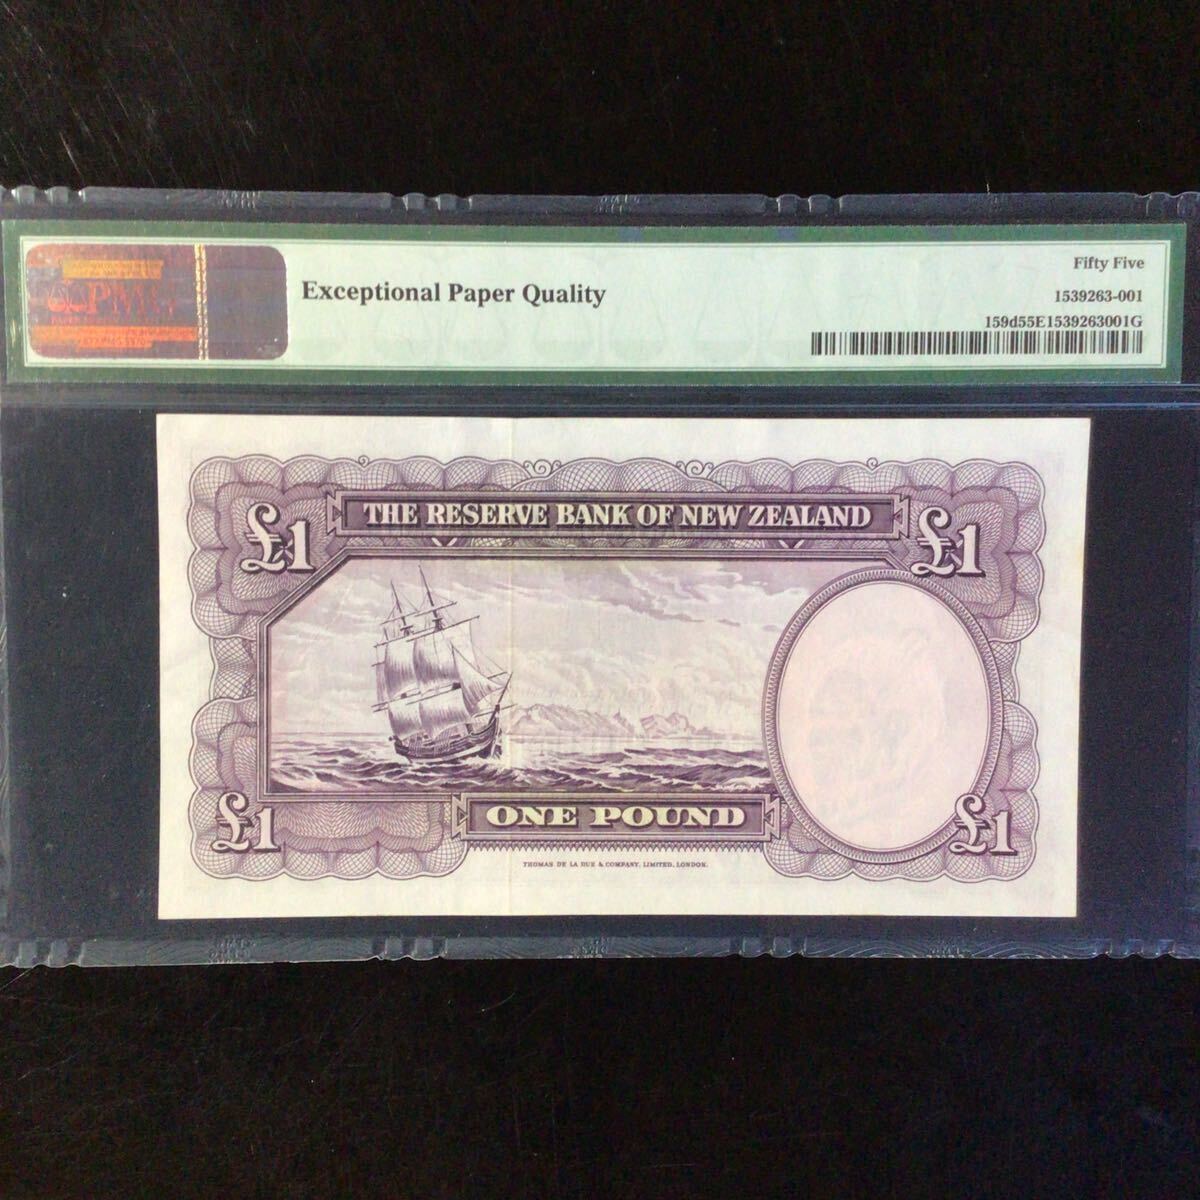 World Banknote Grading NEW ZEALAND《Reserve Bank》1 Pound【1967】『PMG Grading About Uncirculated 55 EPQ』_画像2